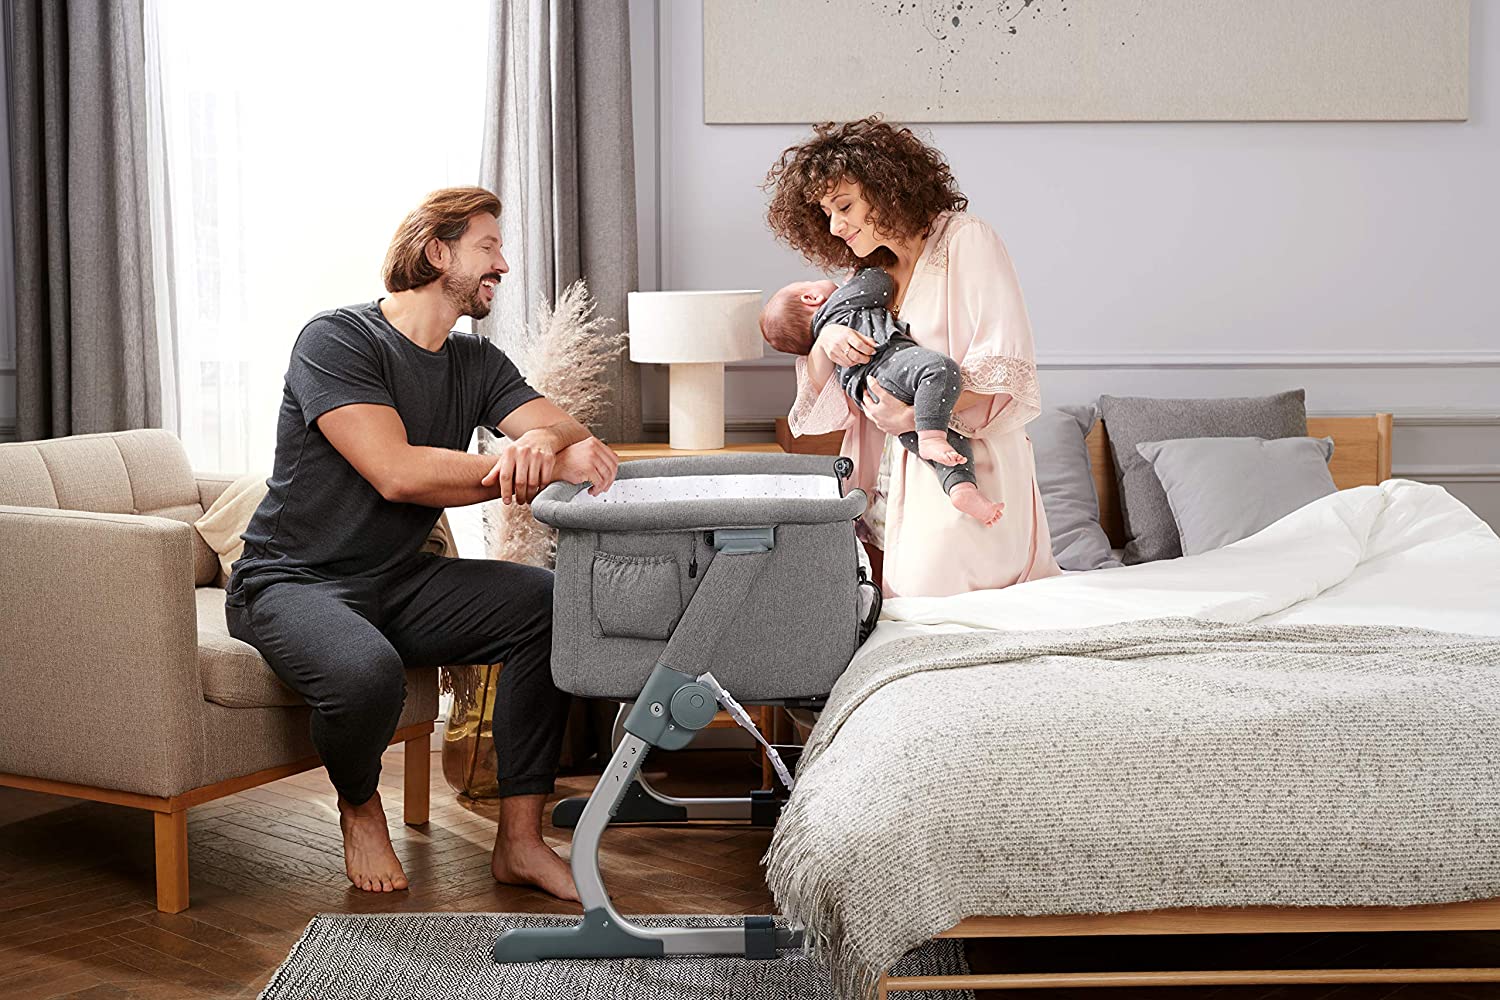 Bedside Crib UNO UP, Travel Cot, Co-Sleeping Bed, Ajustable Height, Easy Fixing, Foldable Side Wall, Transport Wheels, with Accessories, Mattress, Cotton Sheet, for Newborn, 0-9 kg, Gray ?? MULTIFUNCTIONAL - a lightweight 2-in-1 travel cot for babies from